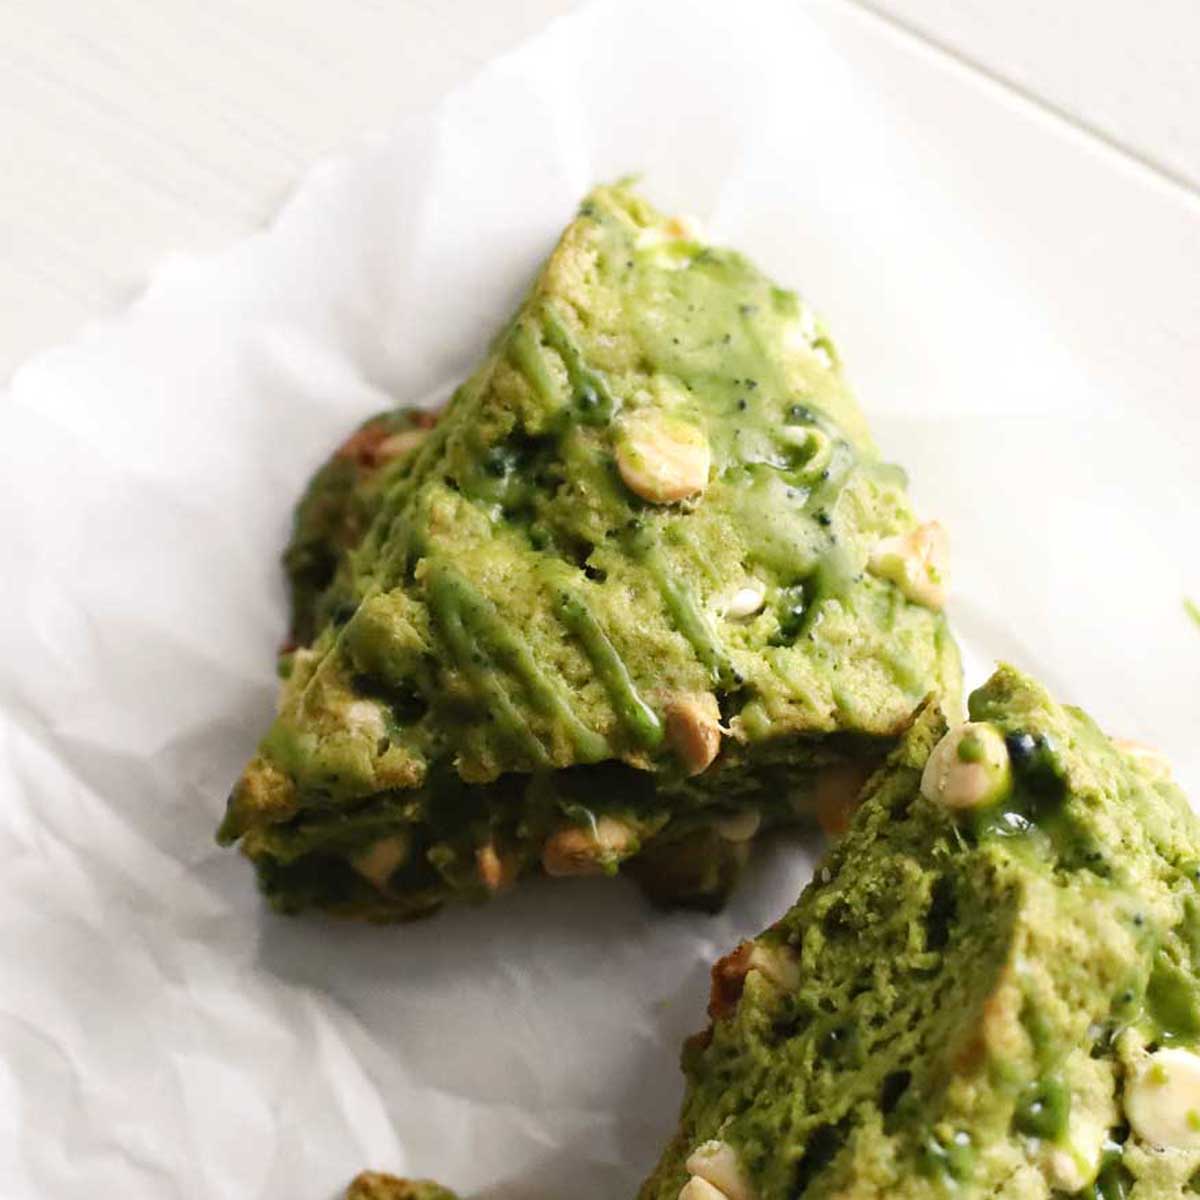 Homemade Matcha Scones with White Chocolate Chips (No Butter Required!) - Finger Sandwich